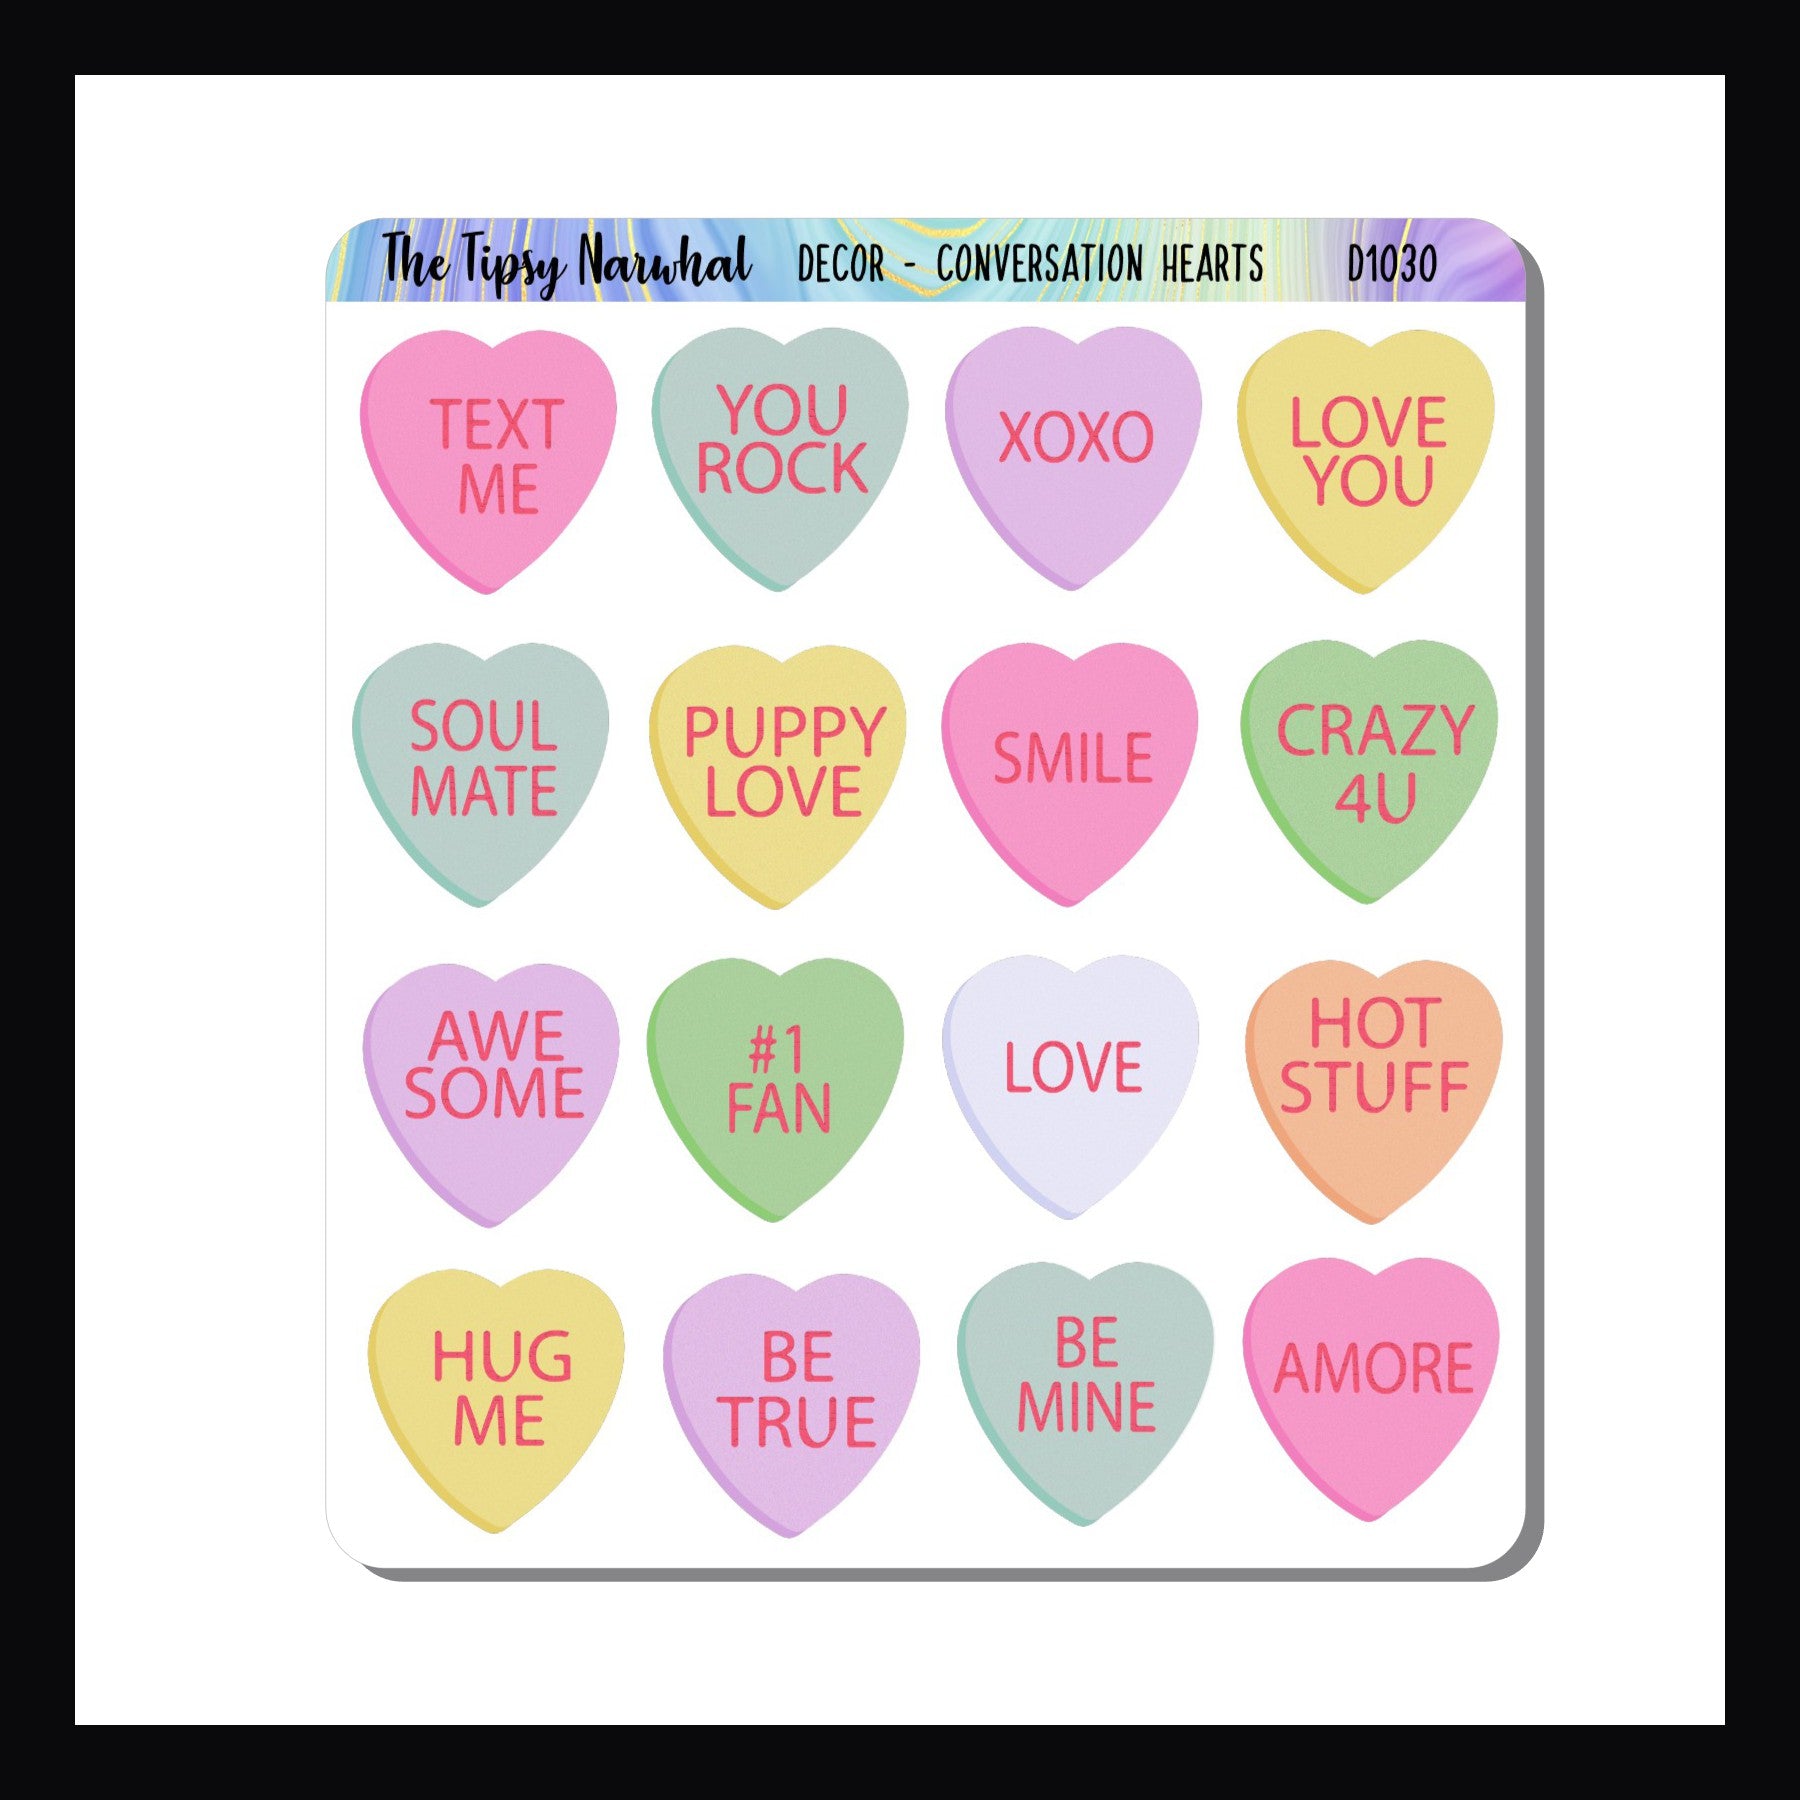 Conversation Hearts Decor Sheet.  Set of 16 conversation heart candy stickers featuring various Valentine sentiments.  Perfect for planners or journals. 